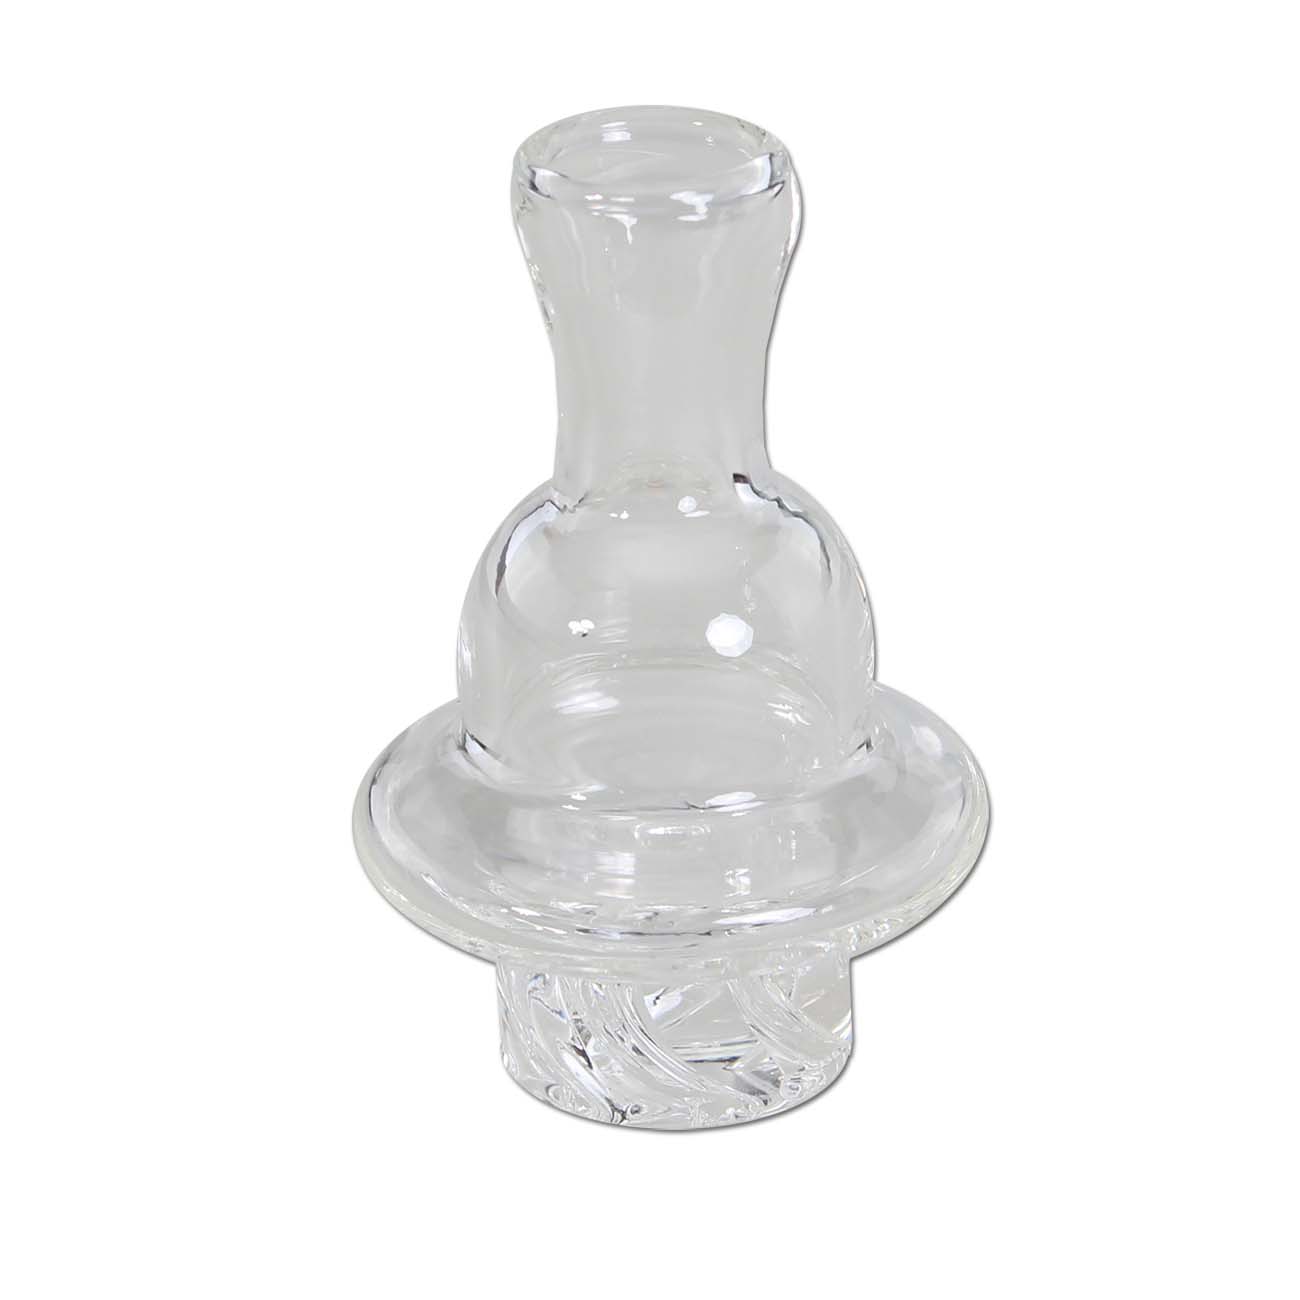 Carb Cap Spinner